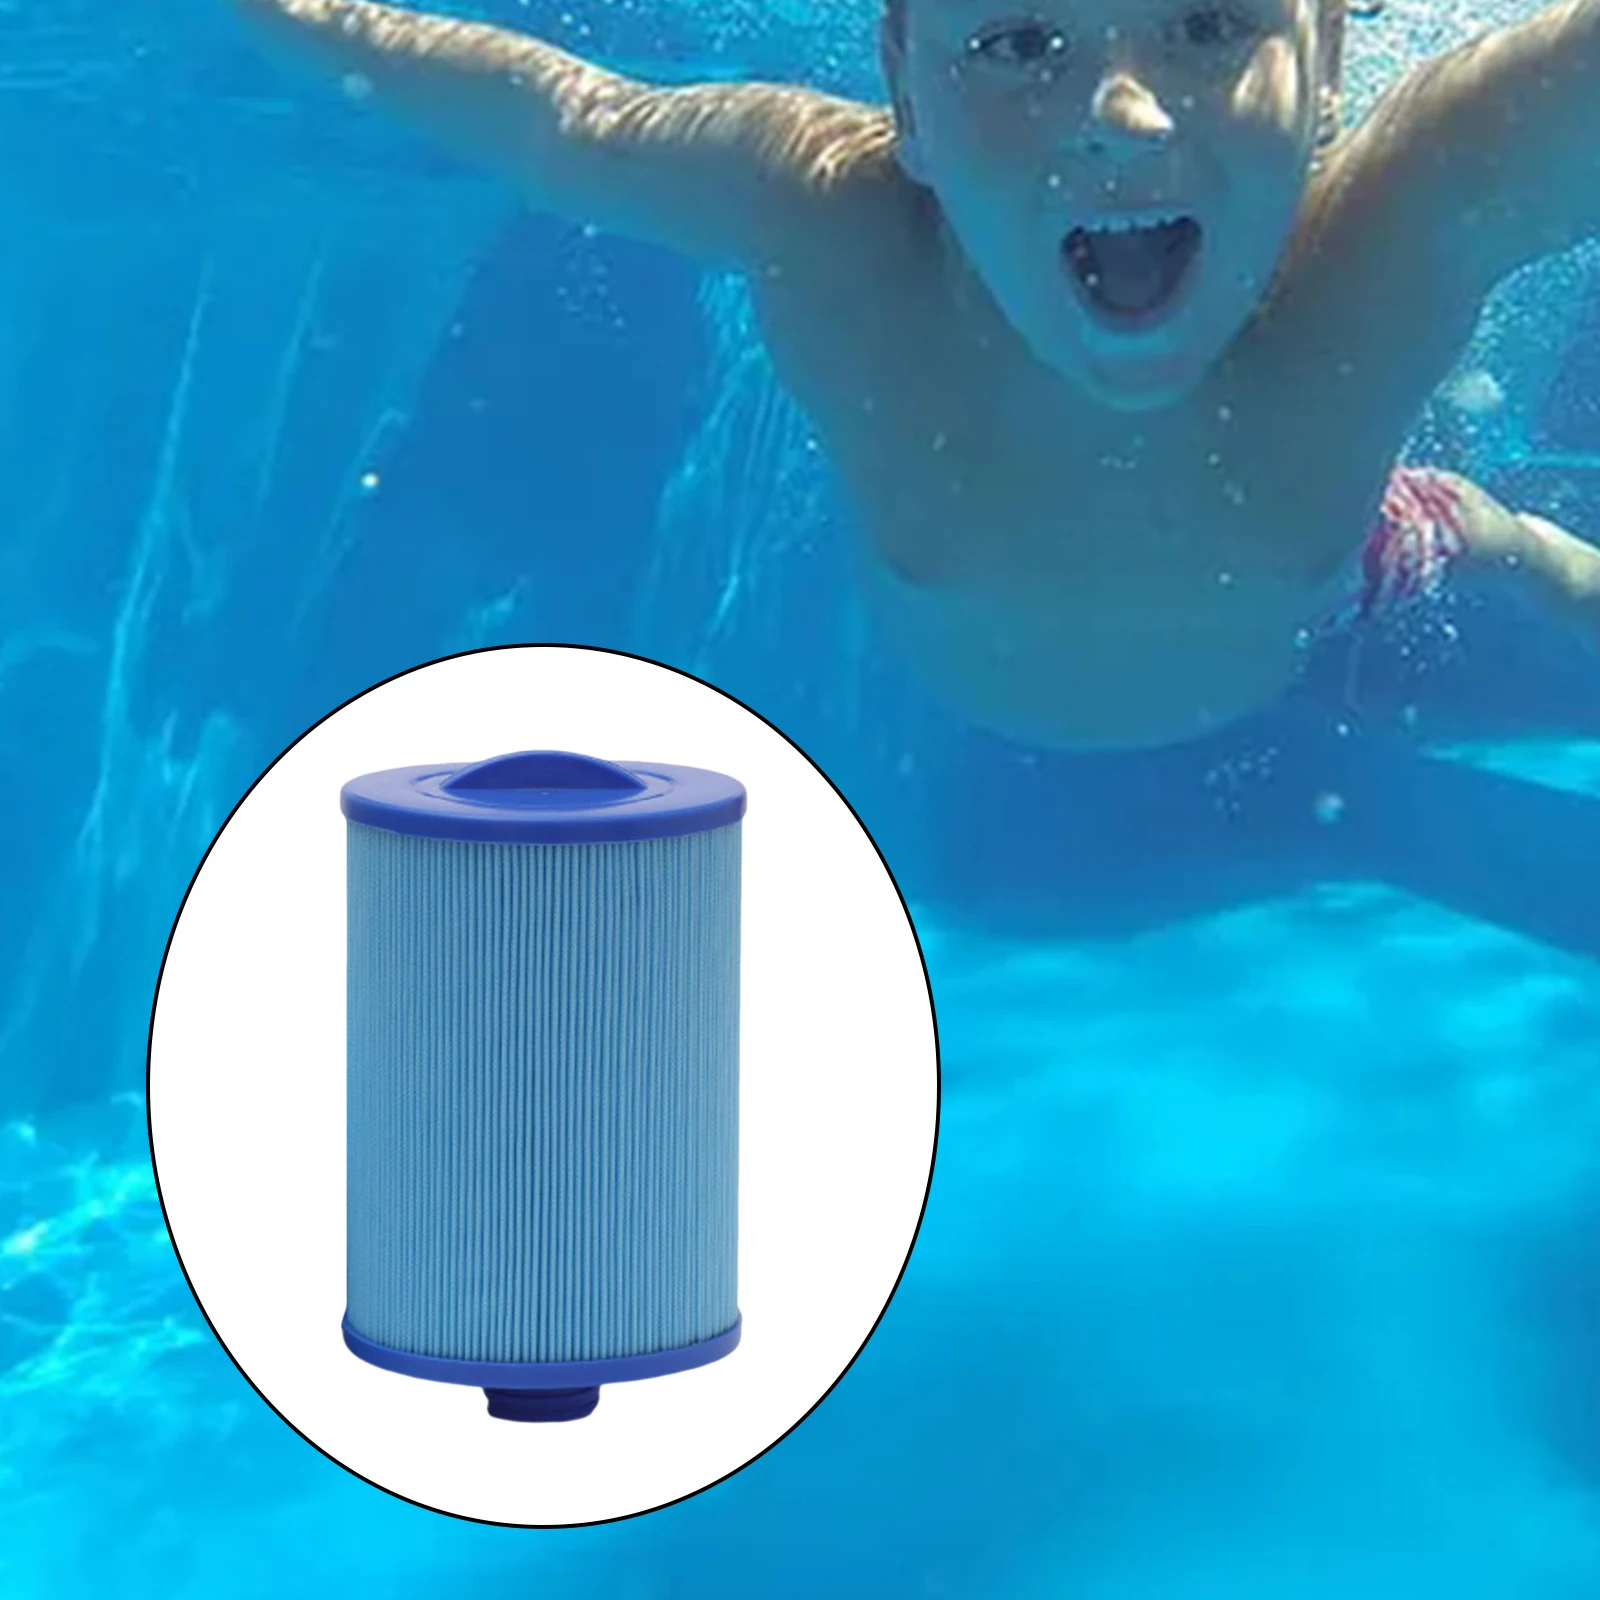 Hot Tub Spa Filter Cartridges Replaces for Pleatco PWW50P3 Premium Compact